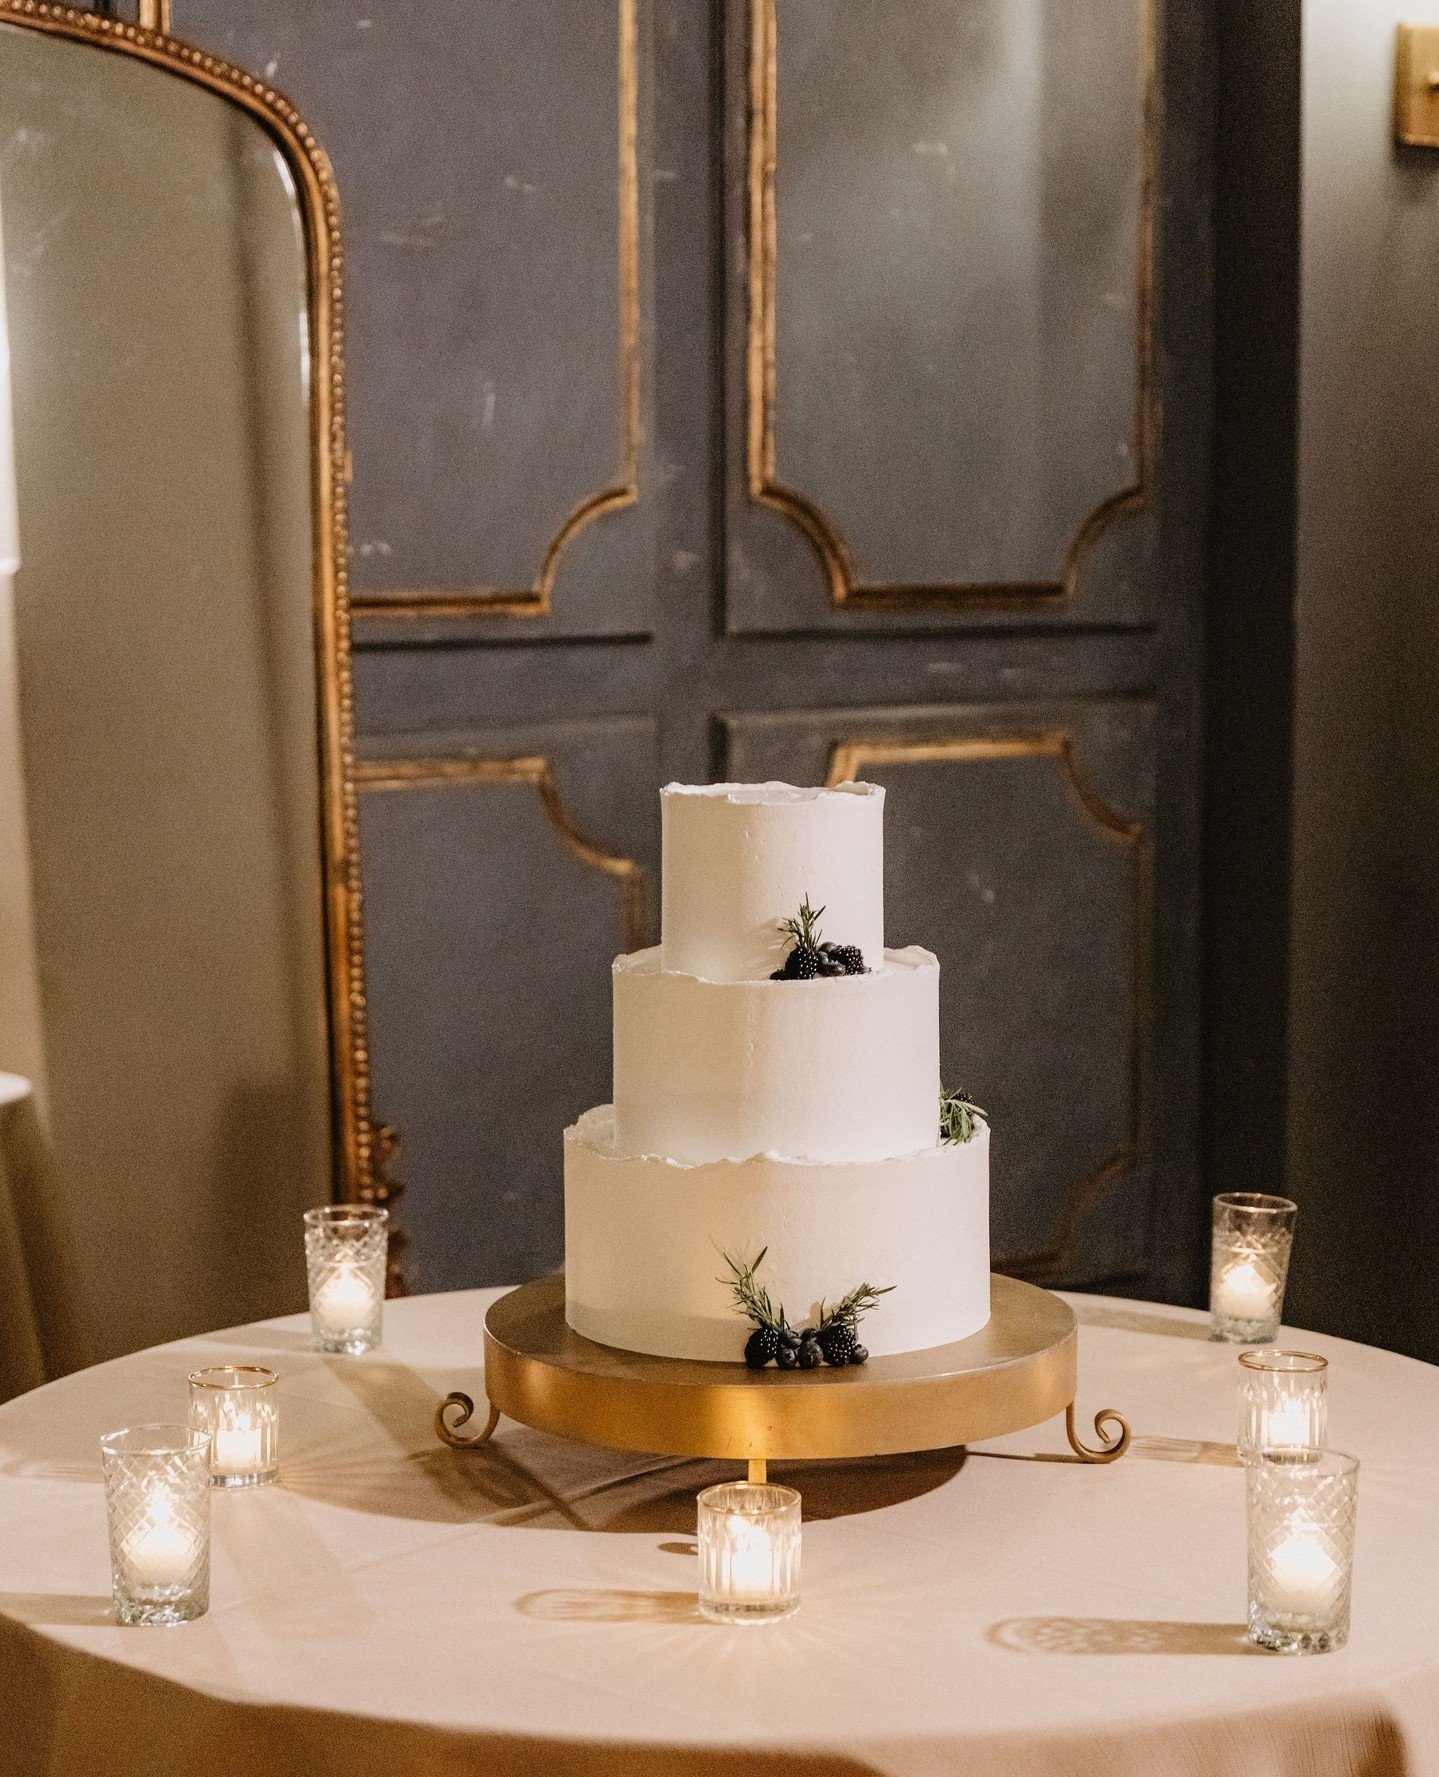 A berry delicious cake🫐⁠
⁠
We love this simple yet stunning cake featuring just a touch of fresh berries and rosemary sprigs.⁠
⁠
Planning: #irisandoakevents⁠
Photographer &amp; Videographer: @emilygreenphoto @nathanwillisweddingfilms⁠
Beauty: @jessi